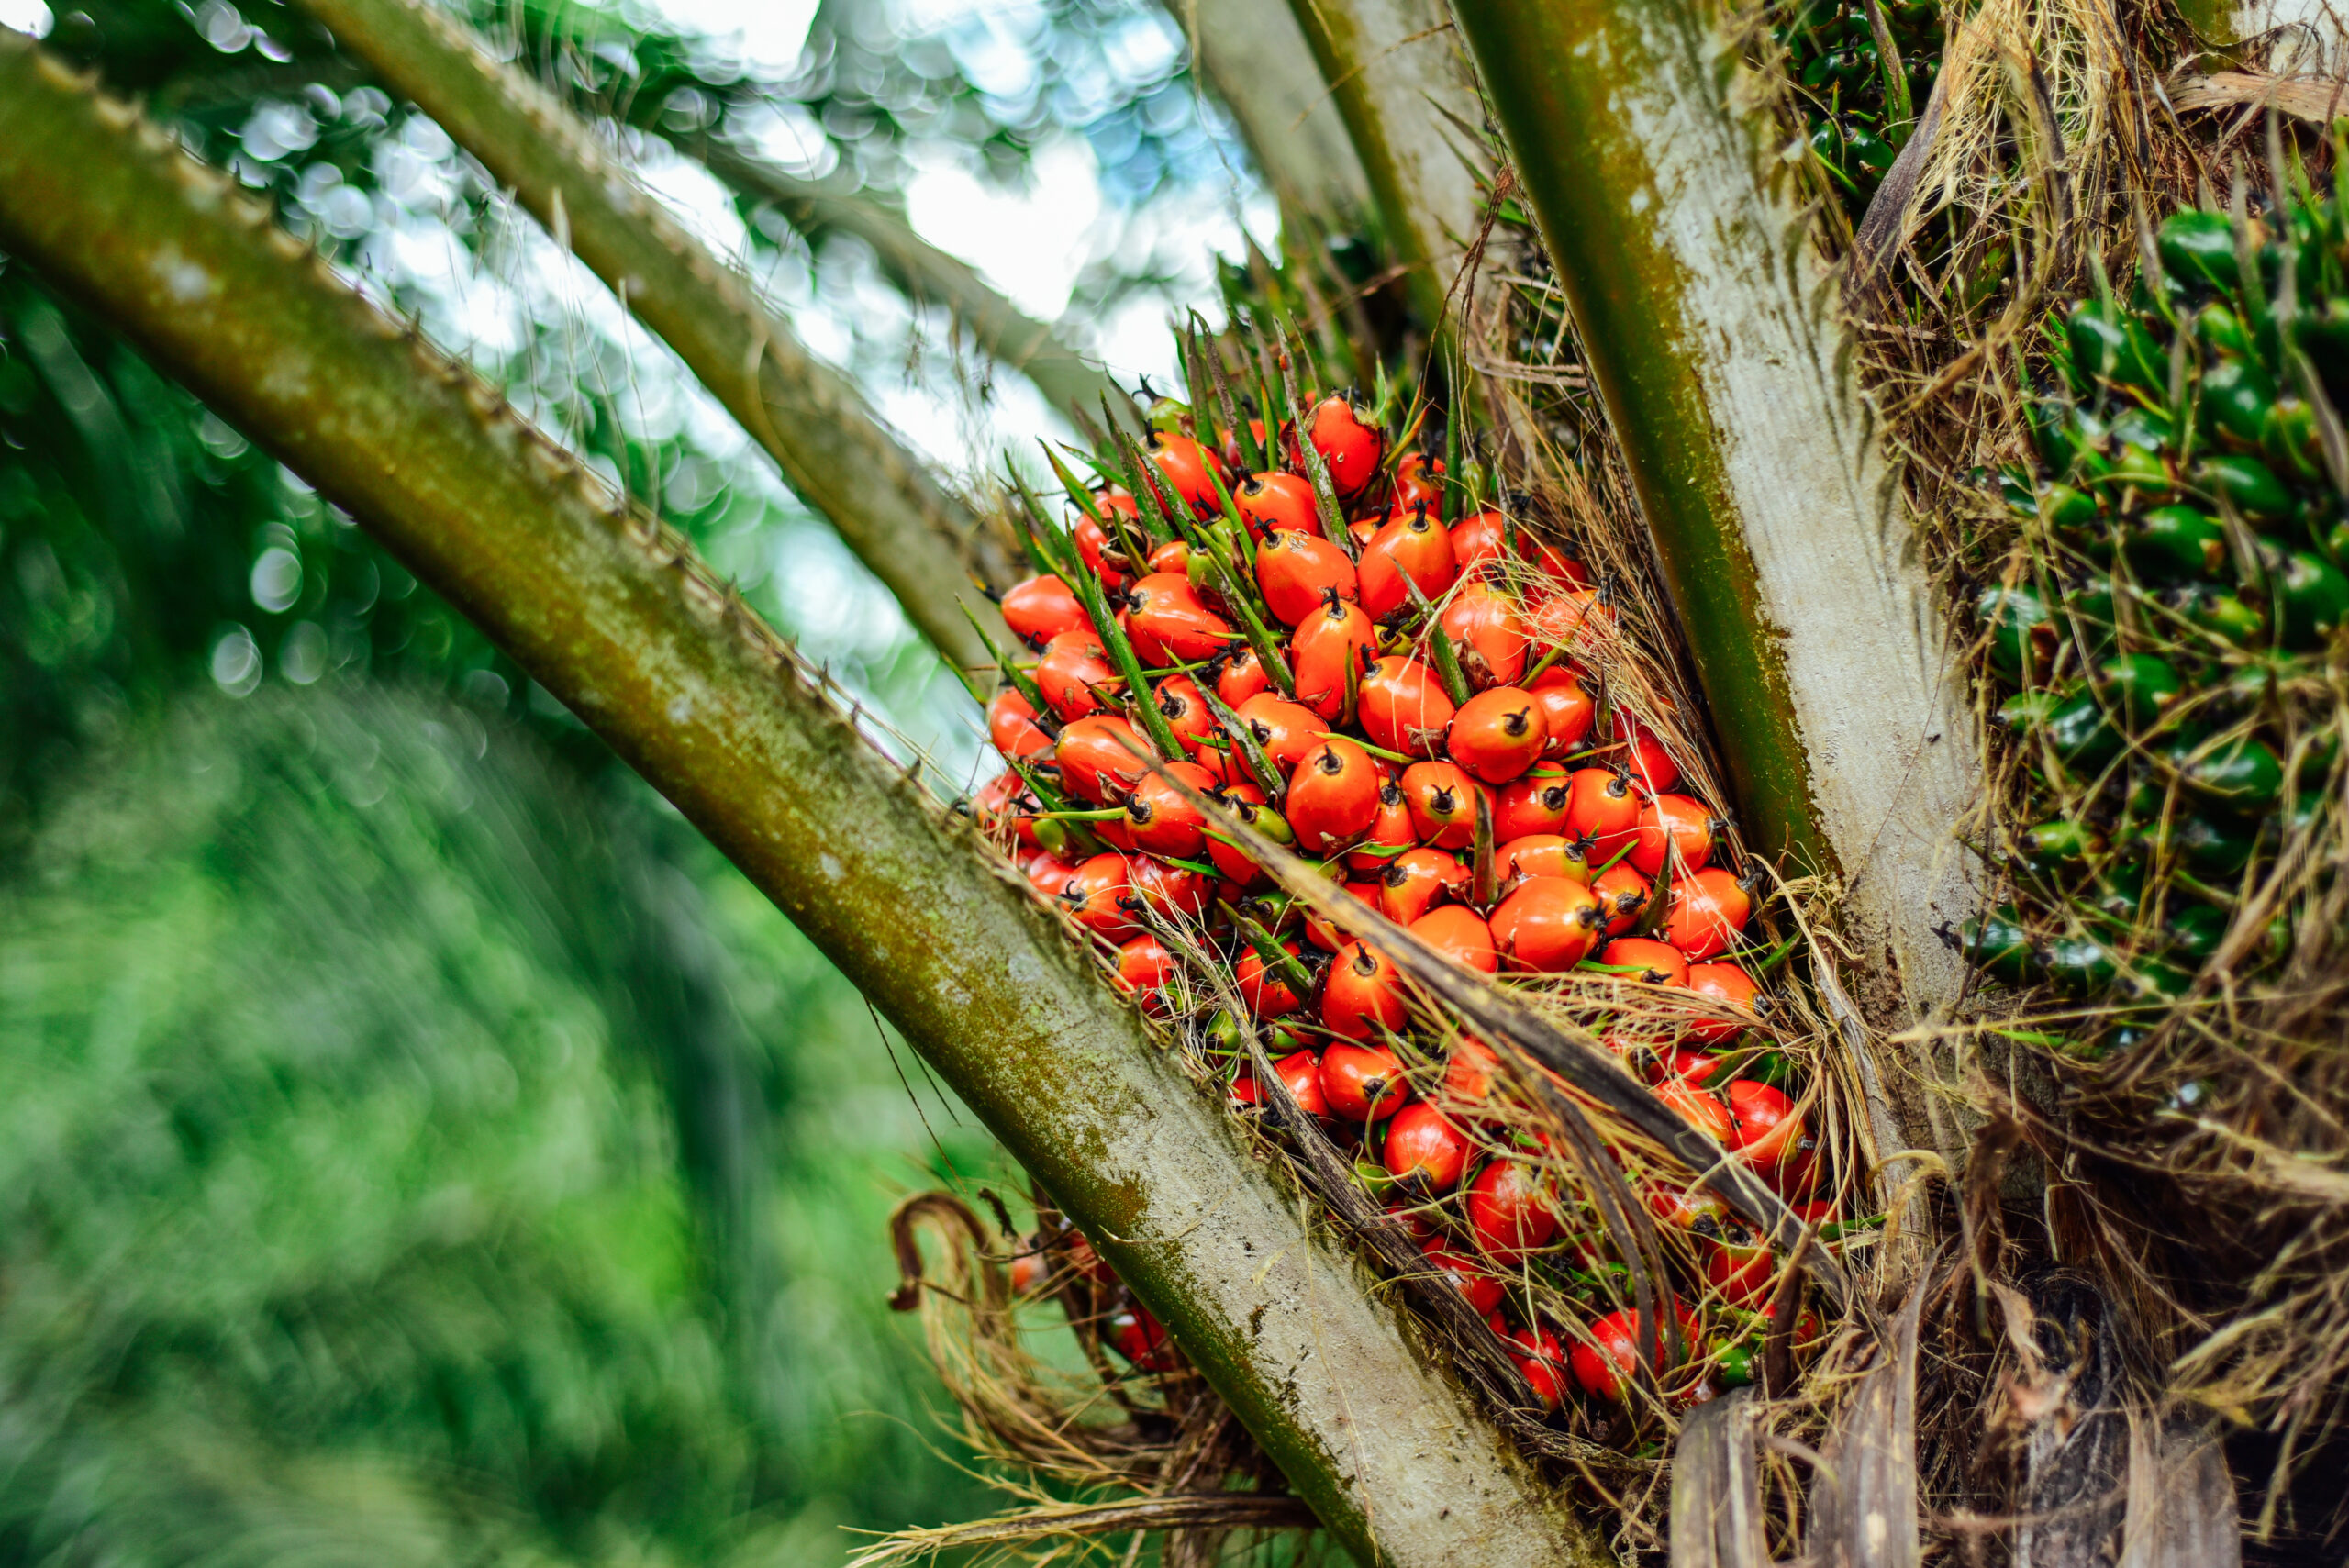 Medium close up of oil palm fruits on trees